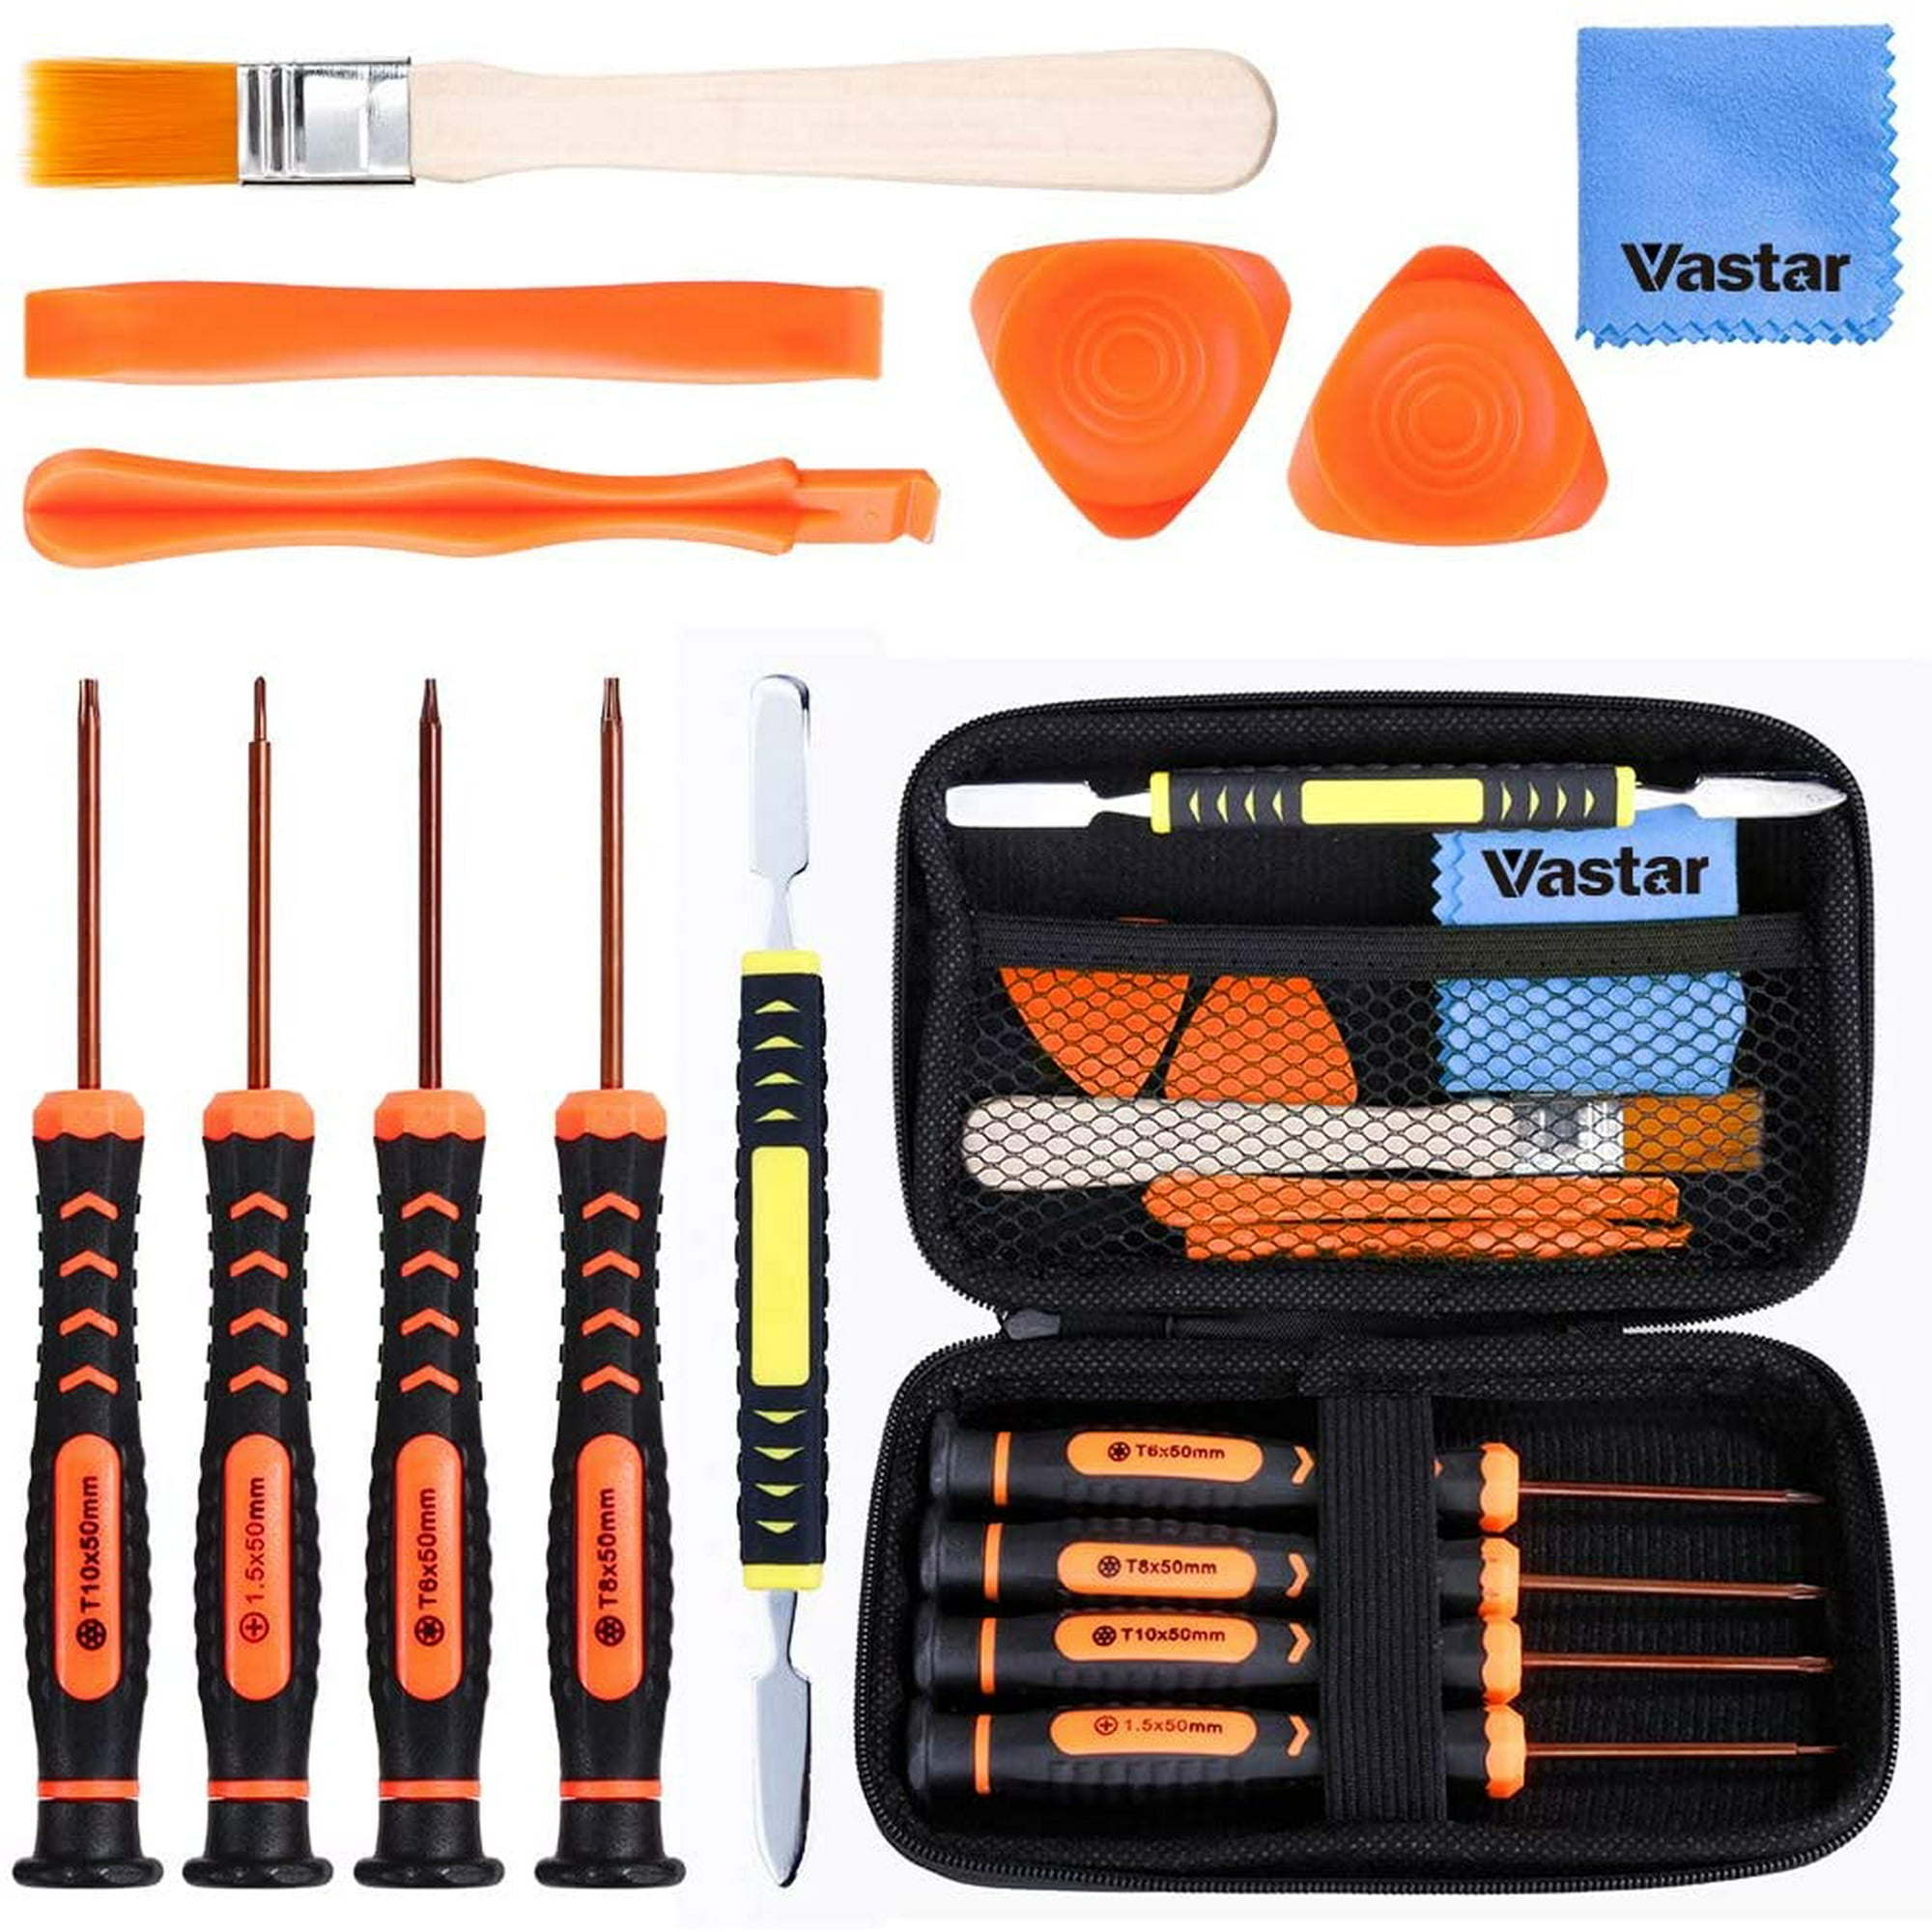 Vastar T6 T8 T10 Xbox One Screwdriver Set, in 1 Xbox Repair Kit for Xbox One Xbox 360 Controller and PS3 PS4 | Walmart Canada